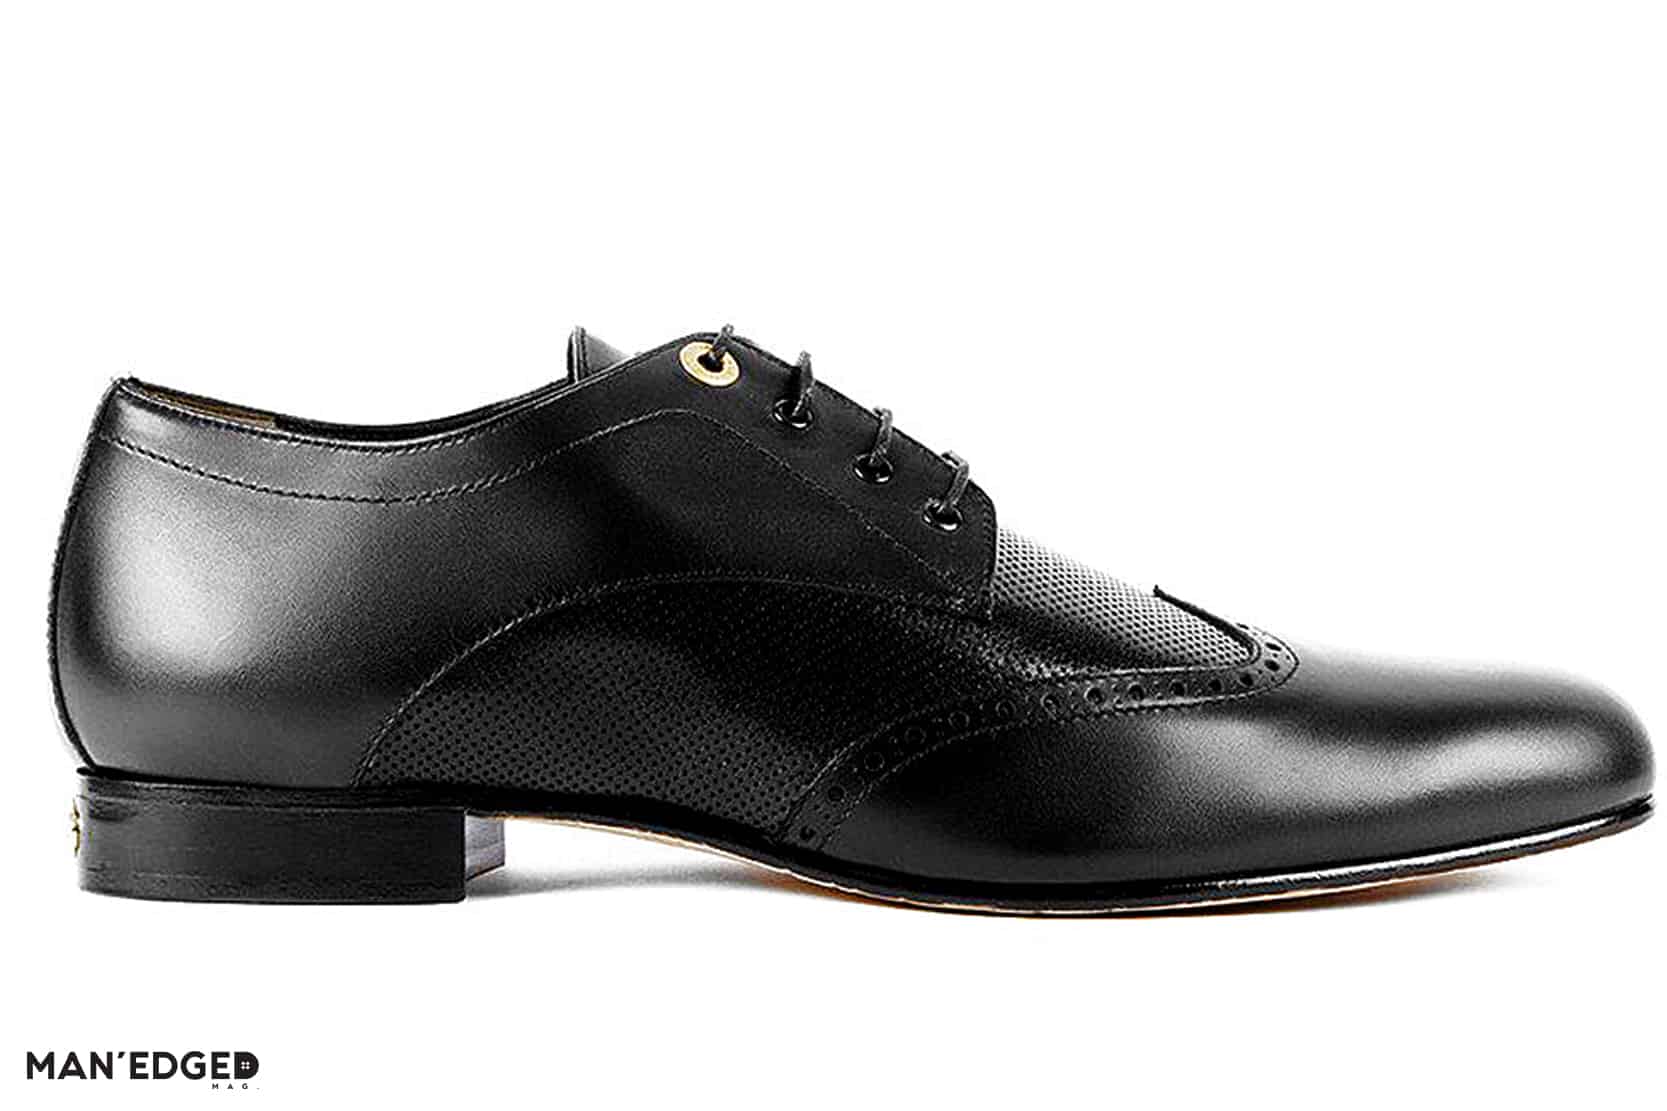 Men's Shoe by Rob McAllan featured in Gift Ideas for the Dapper Guy